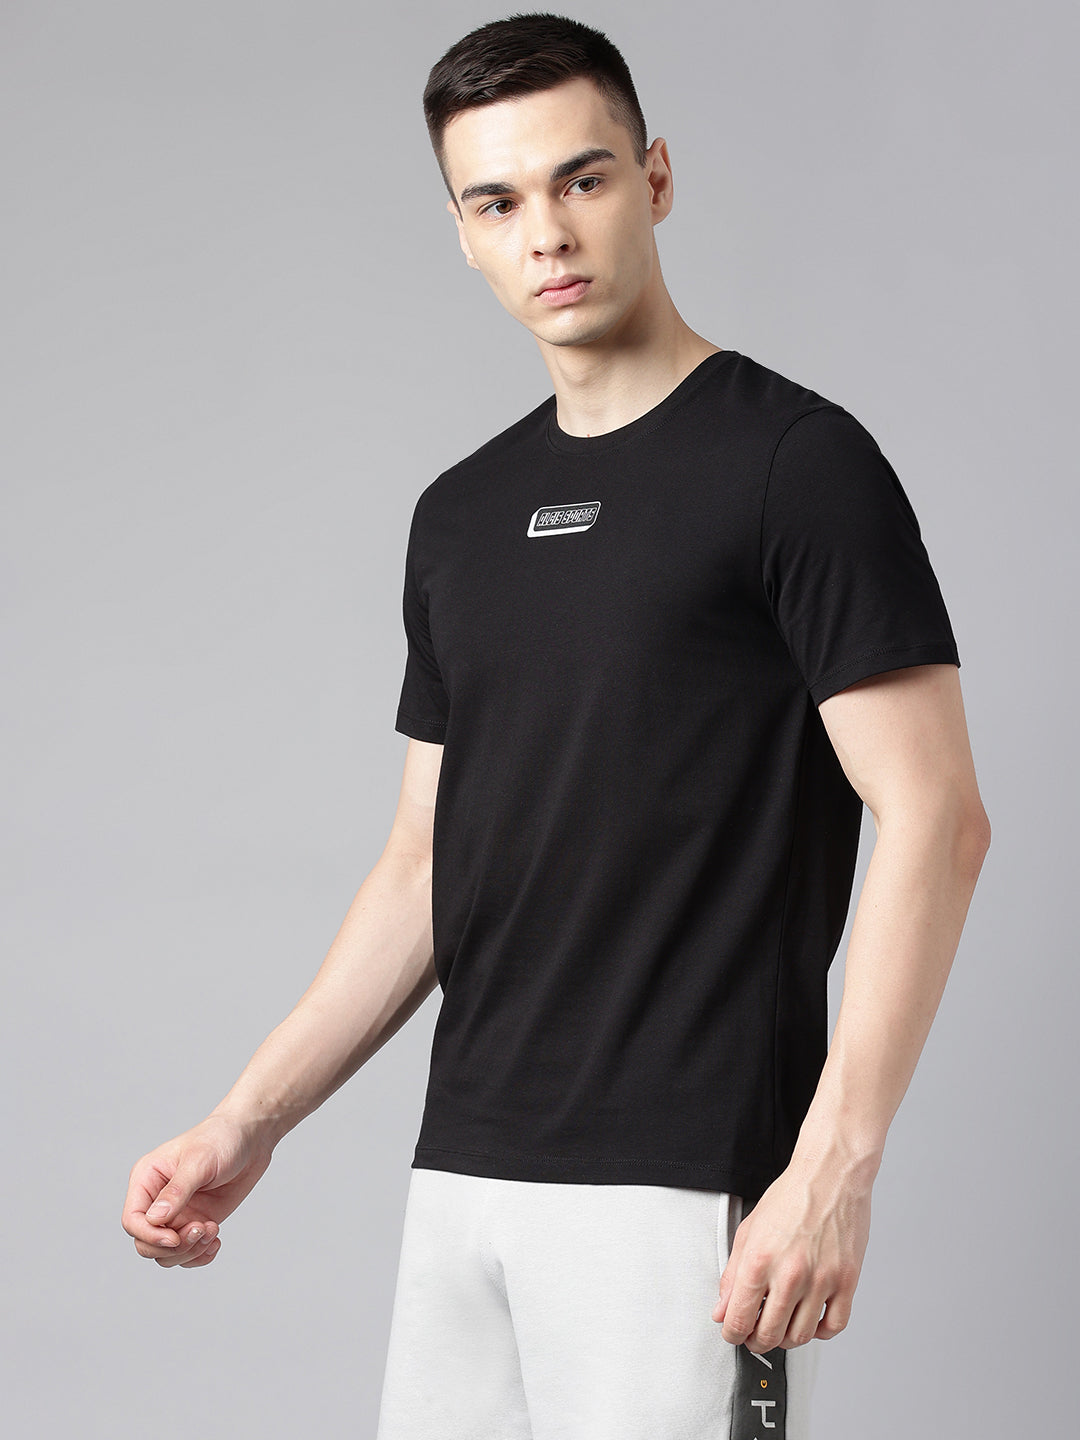 Alcis Men's Printed Black Soft-Touch Regular-Fit Athleisure T-Shirt